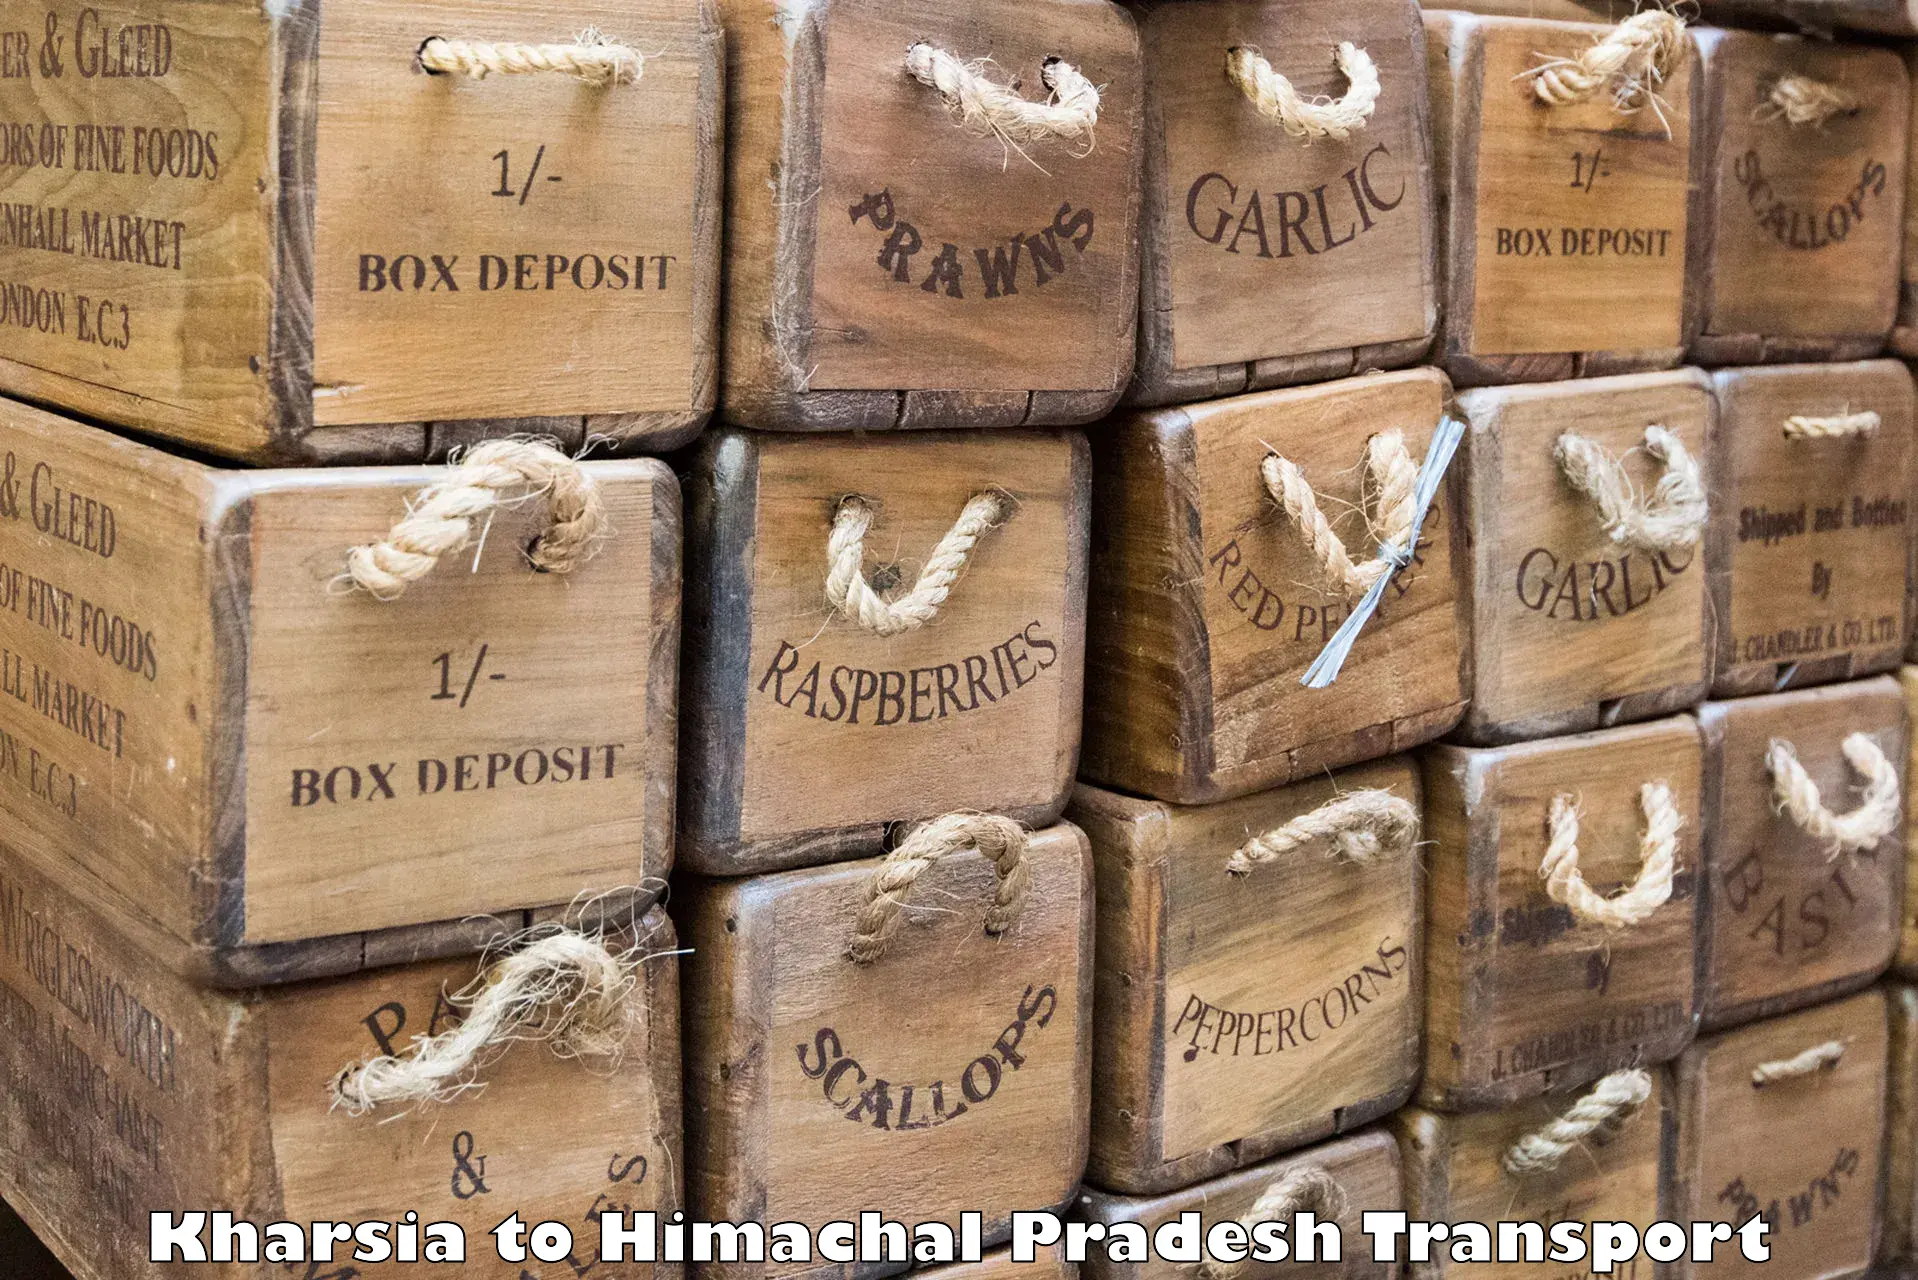 Truck transport companies in India Kharsia to Manali